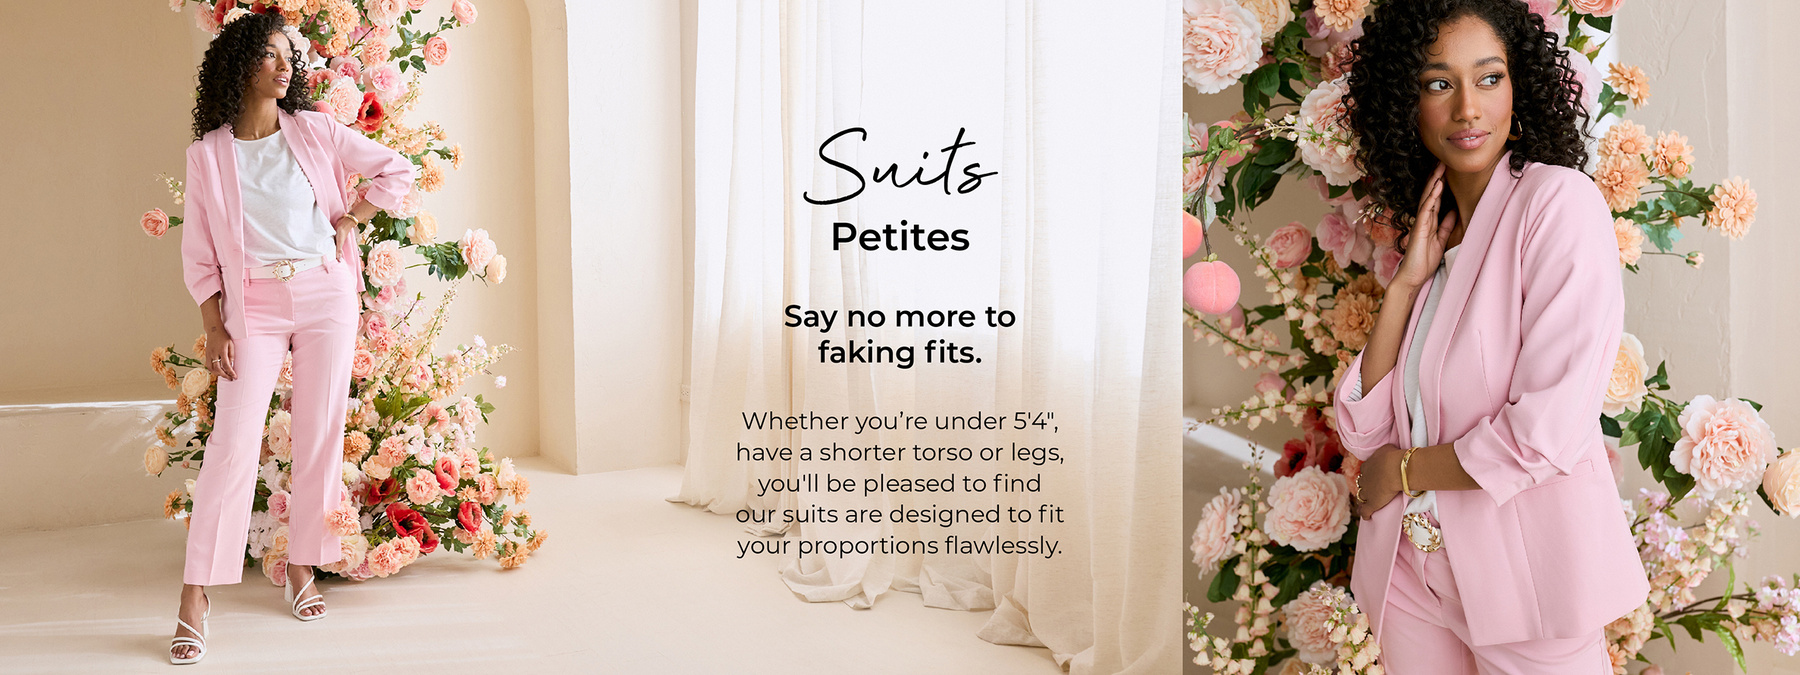 Suits Petites. Say no more to faking fits. Whether you're under 5'4", have a shorter torso or legs, you'll be pleased to find our suits are designed to fit your proportions flawlessly.